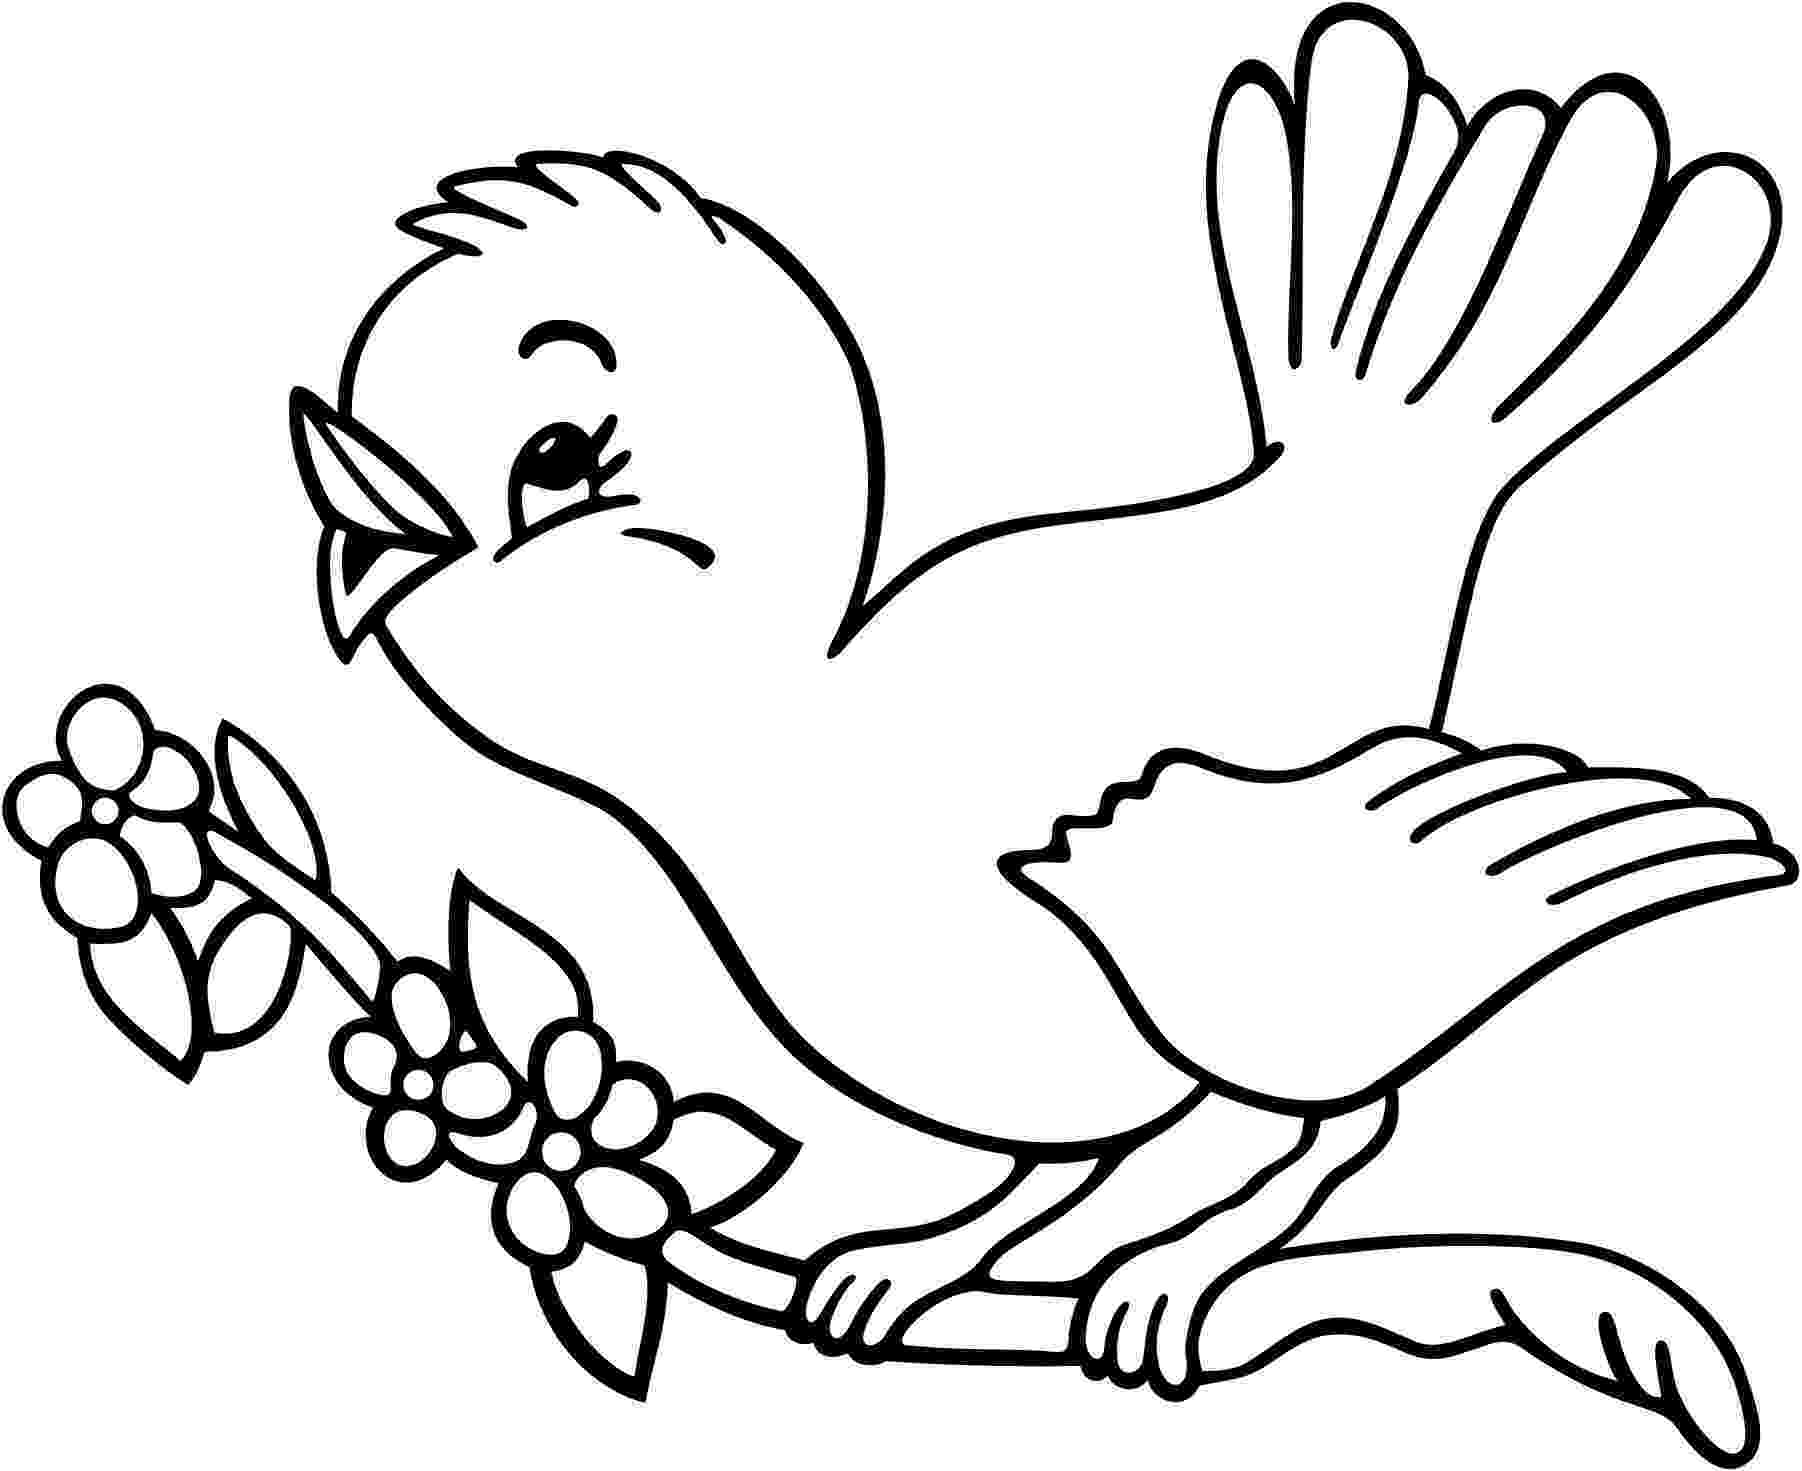 colouring pages with birds cute bird coloring page wecoloringpagecom pages colouring with birds 